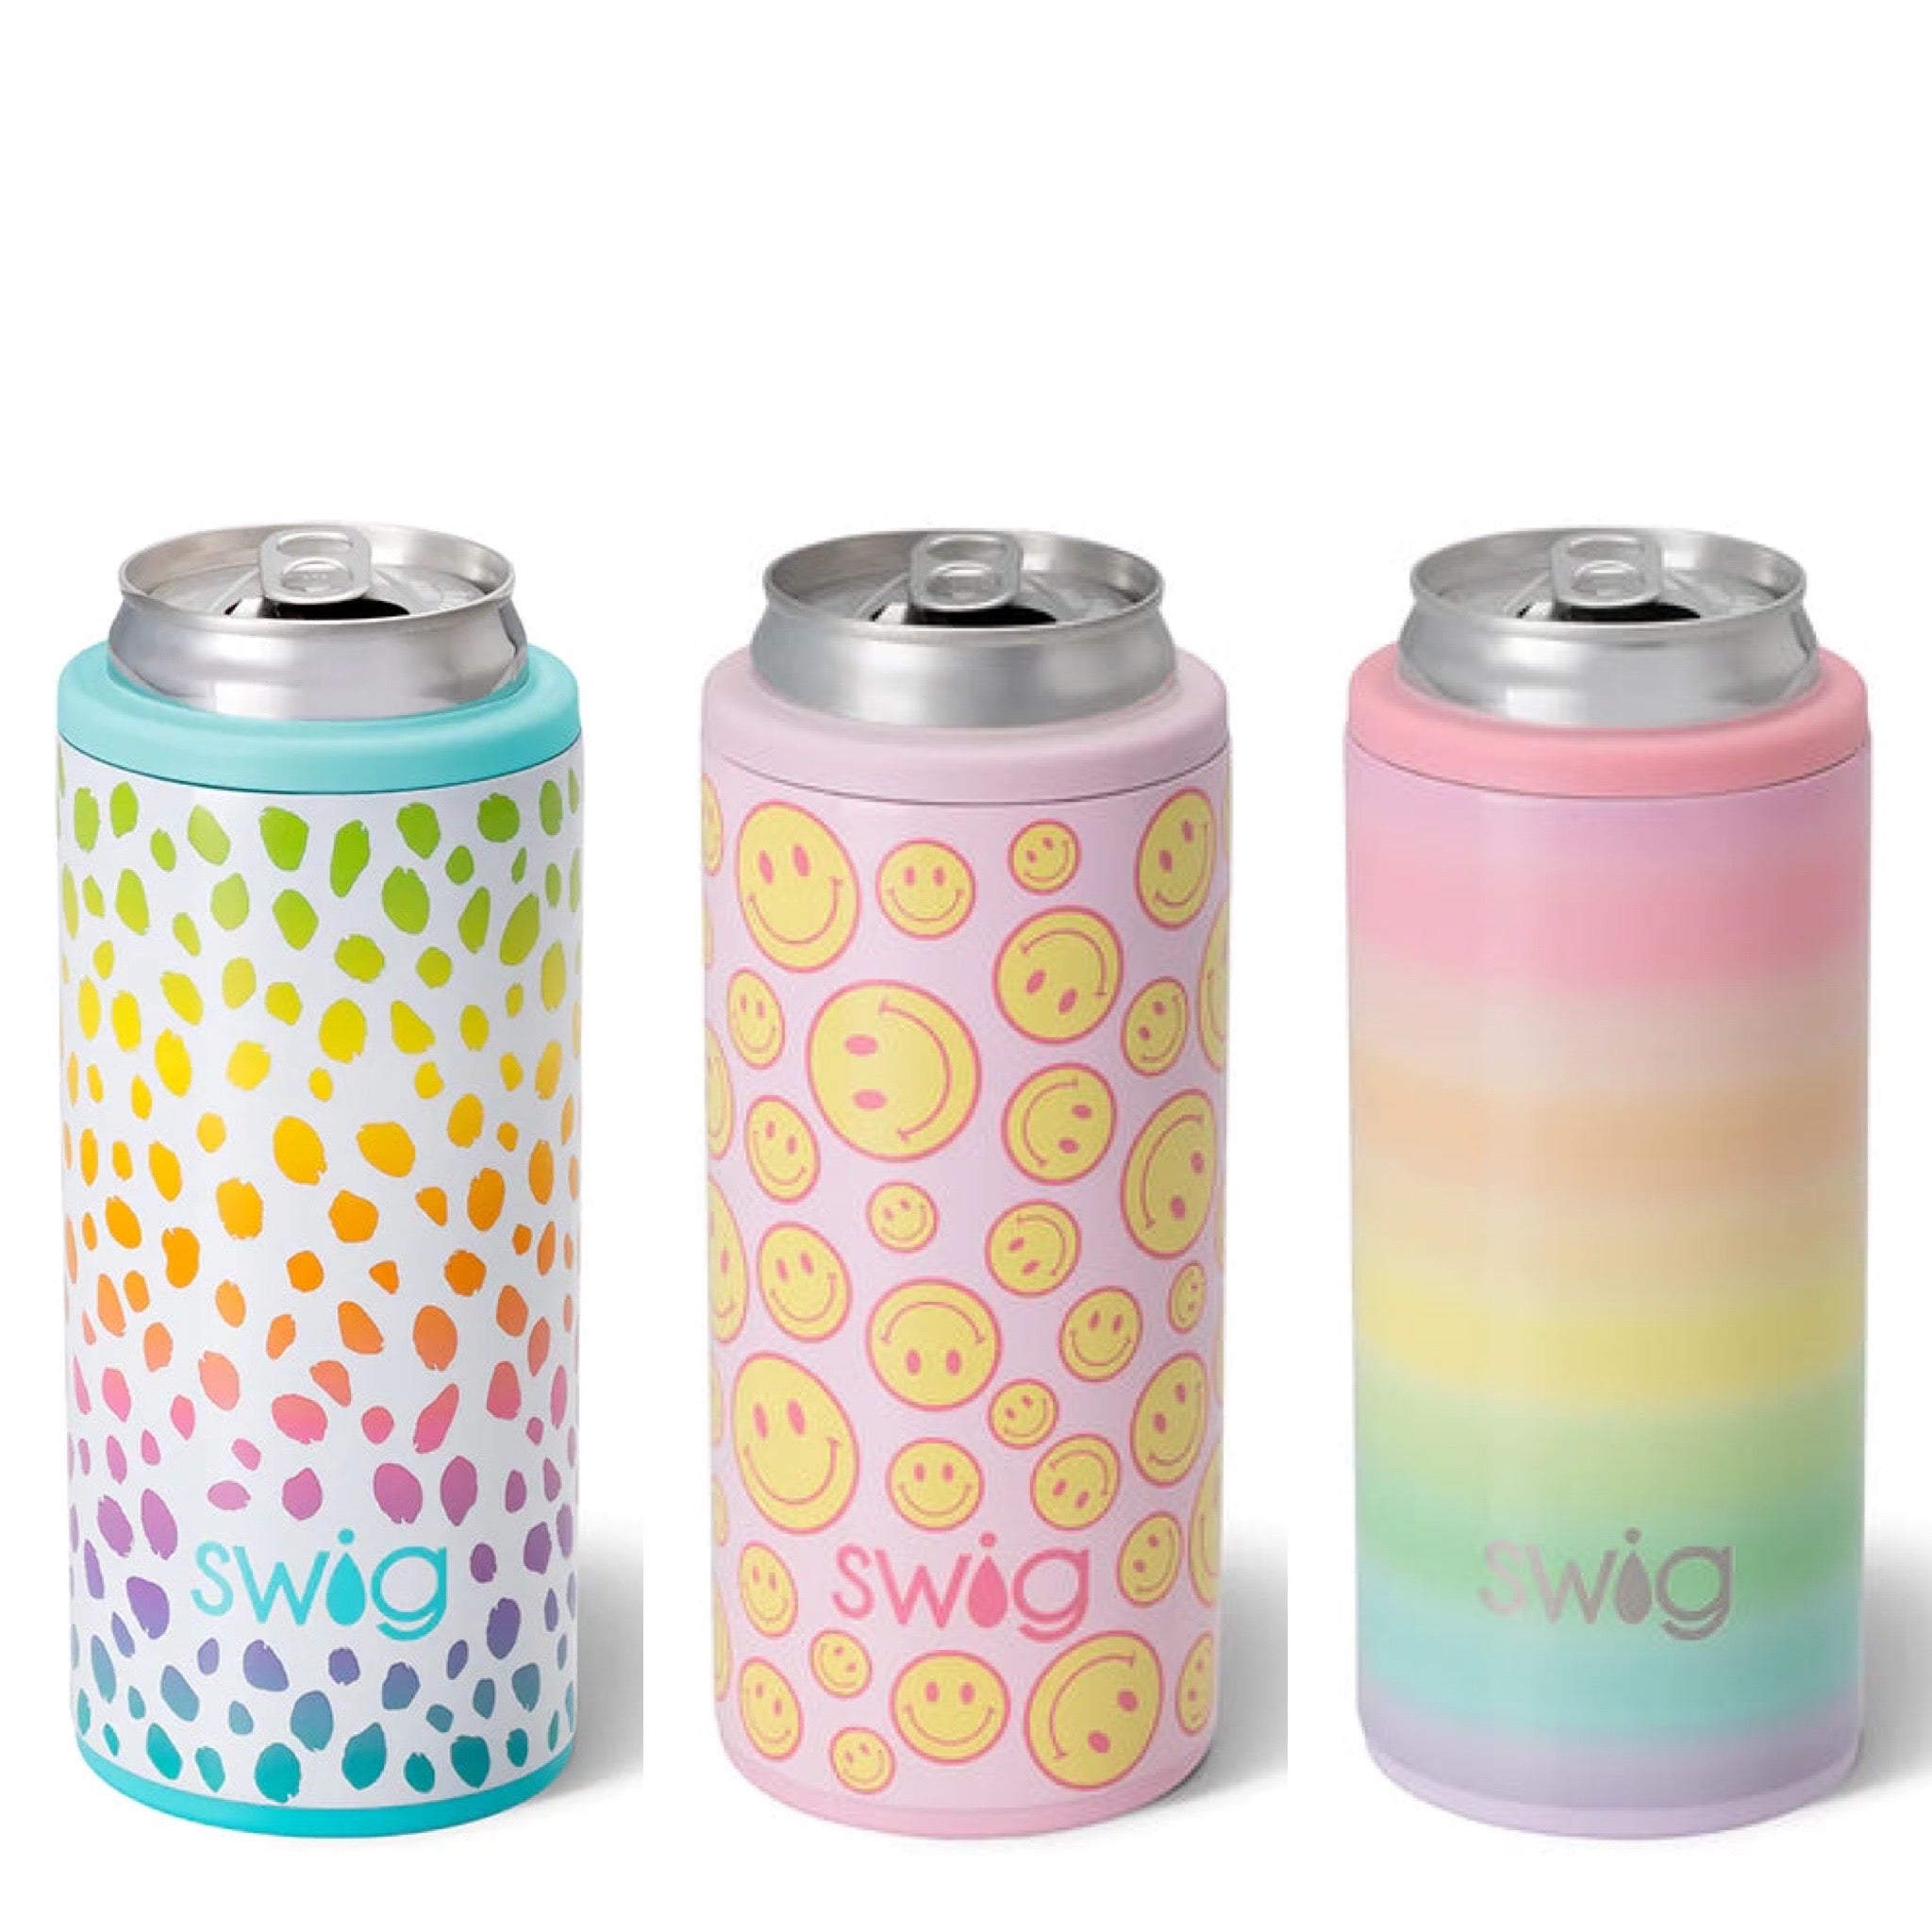 Swig Life 12oz Skinny Can Cooler, Insulated Stainless Steel Slim Can Cooler